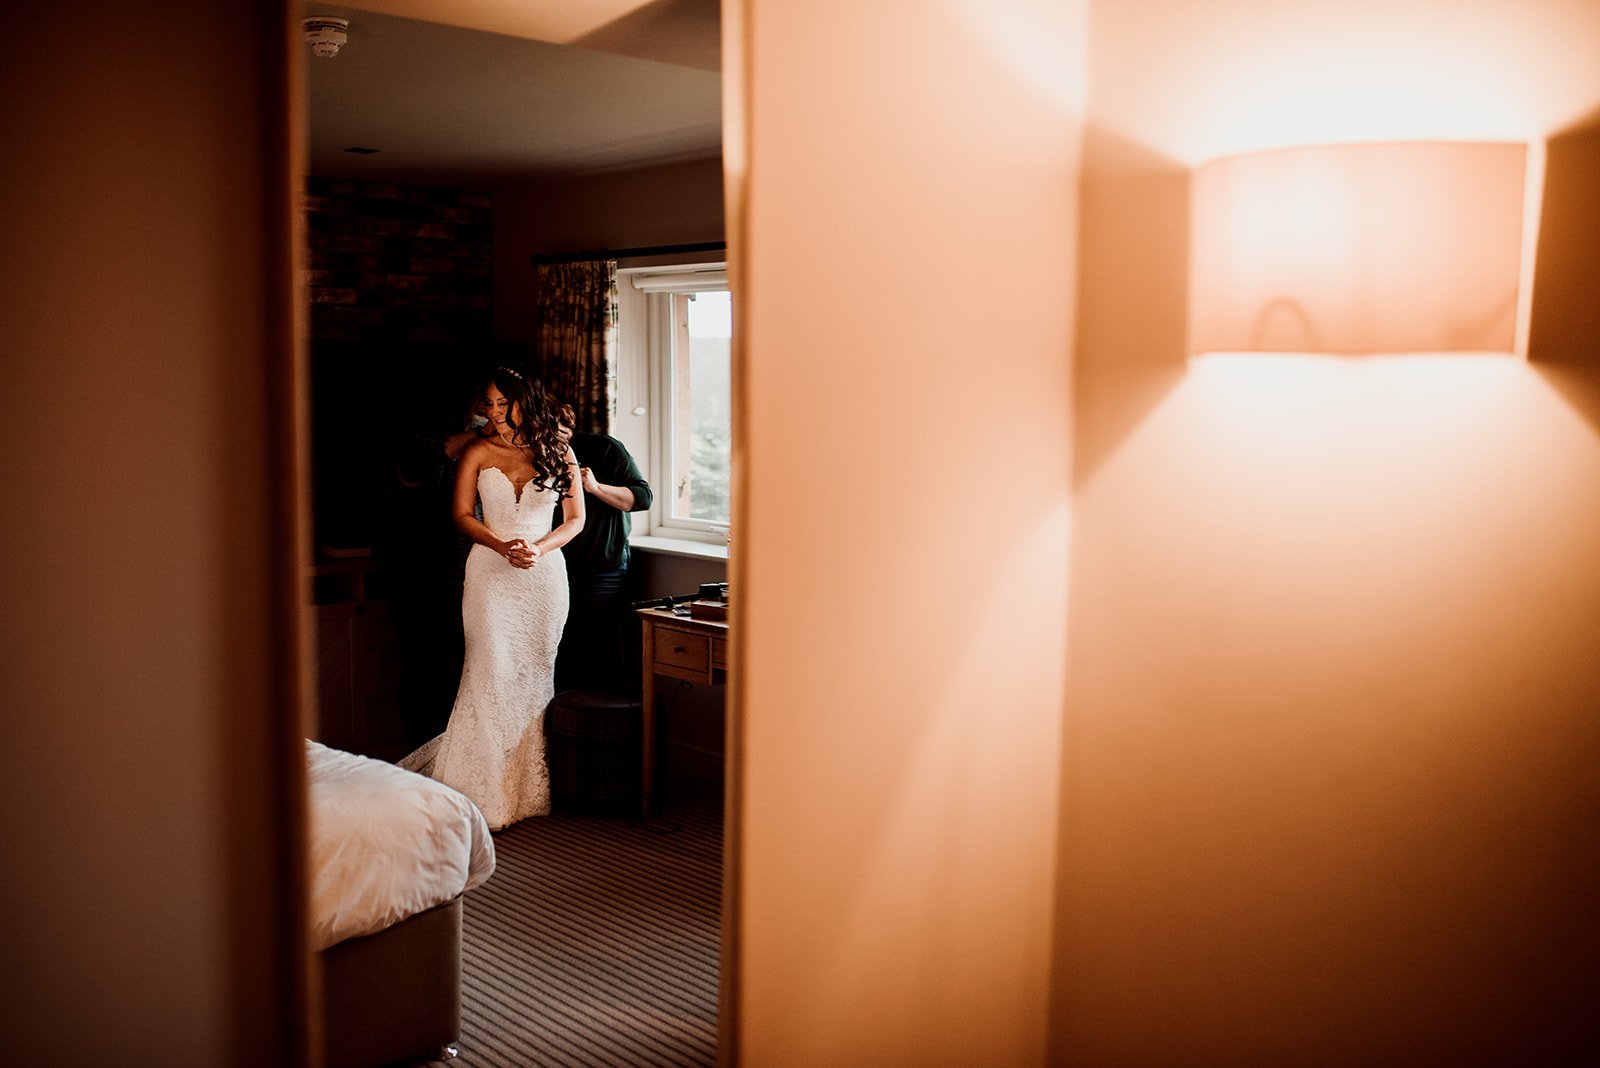 An abstract image of the bride in the mirror